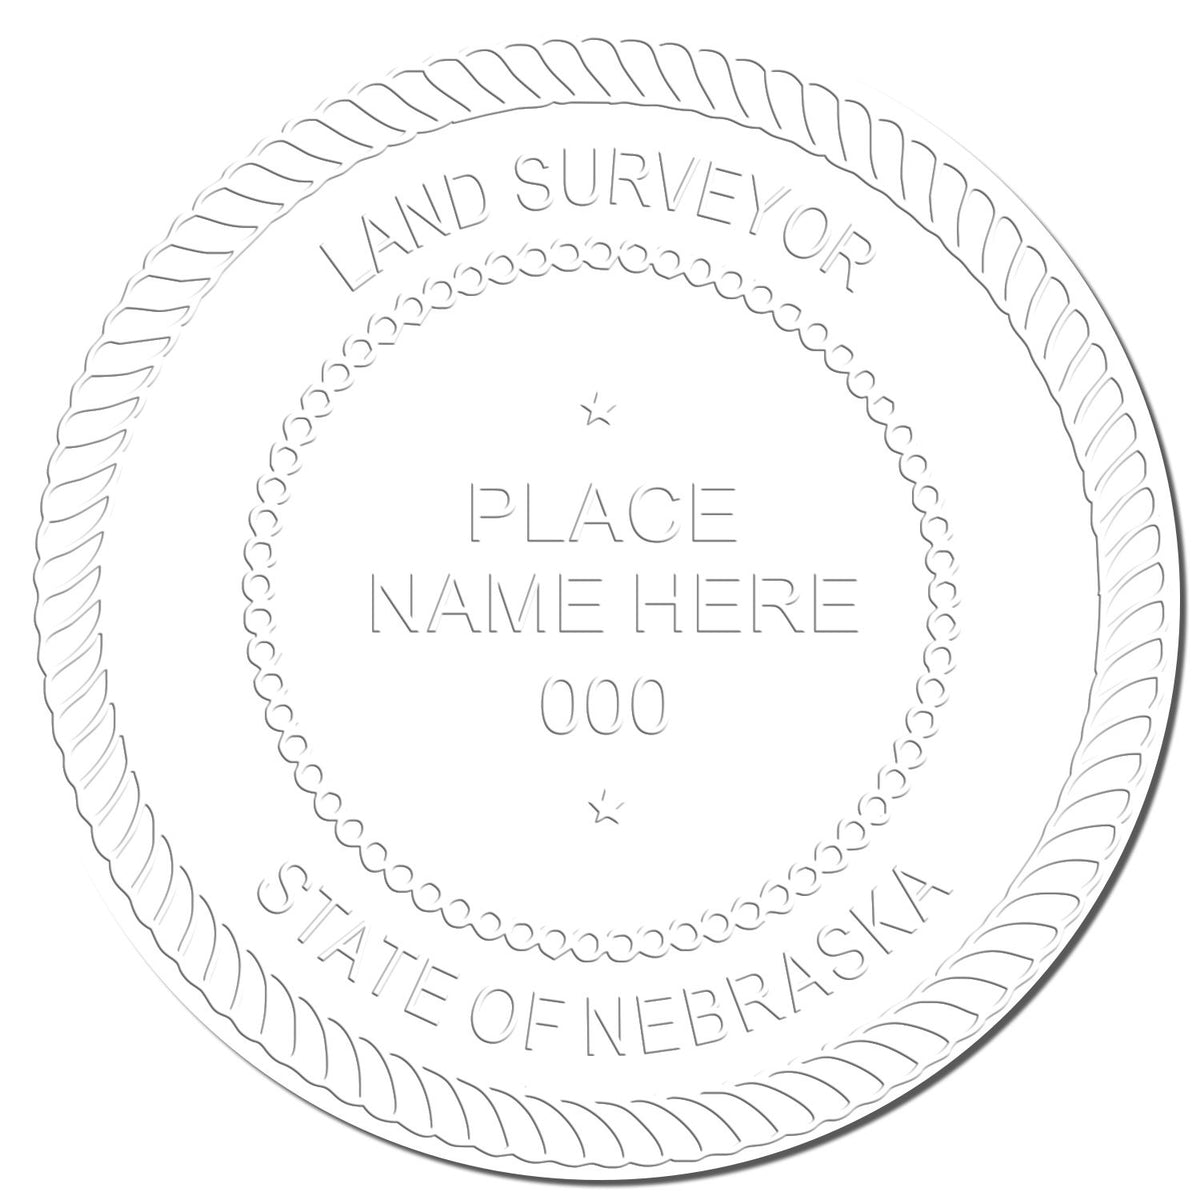 This paper is stamped with a sample imprint of the State of Nebraska Soft Land Surveyor Embossing Seal, signifying its quality and reliability.